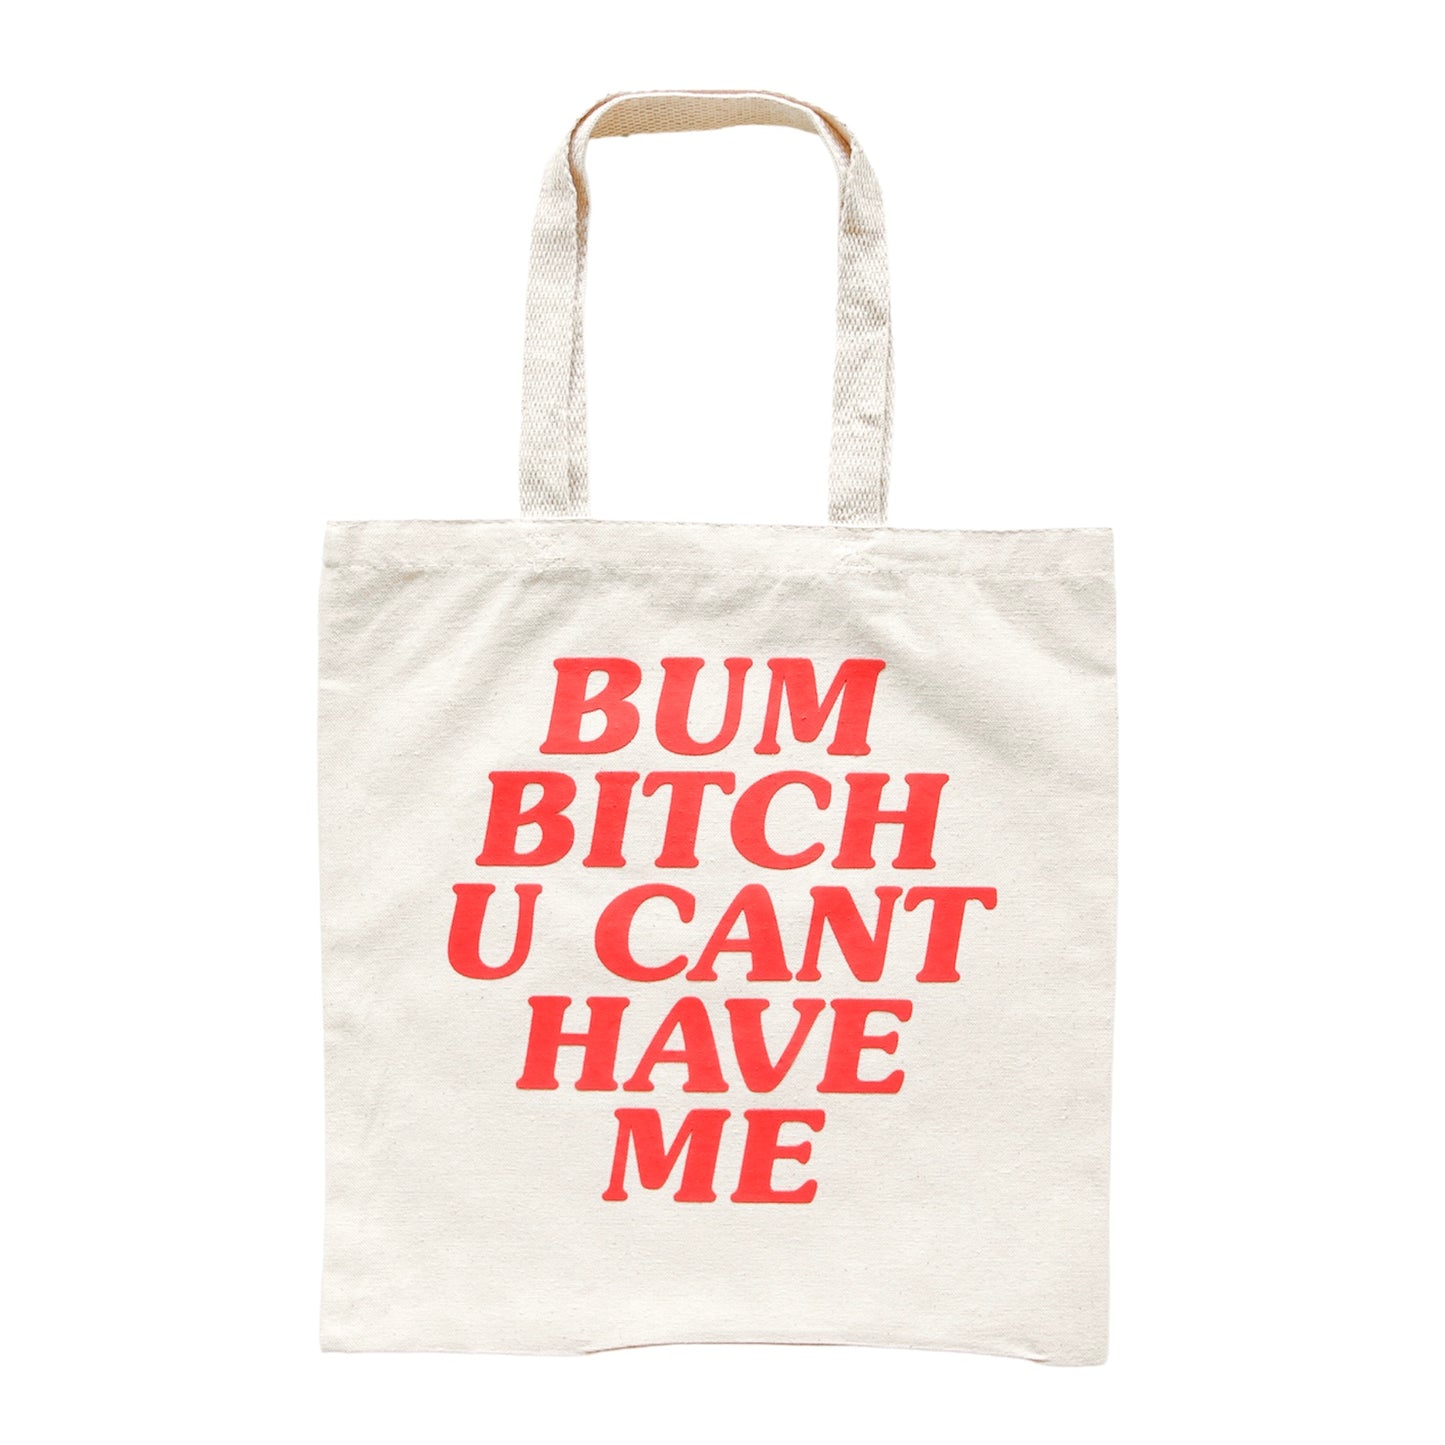 Cream “Bum Bitch You Cant Have Me” Tote Bag